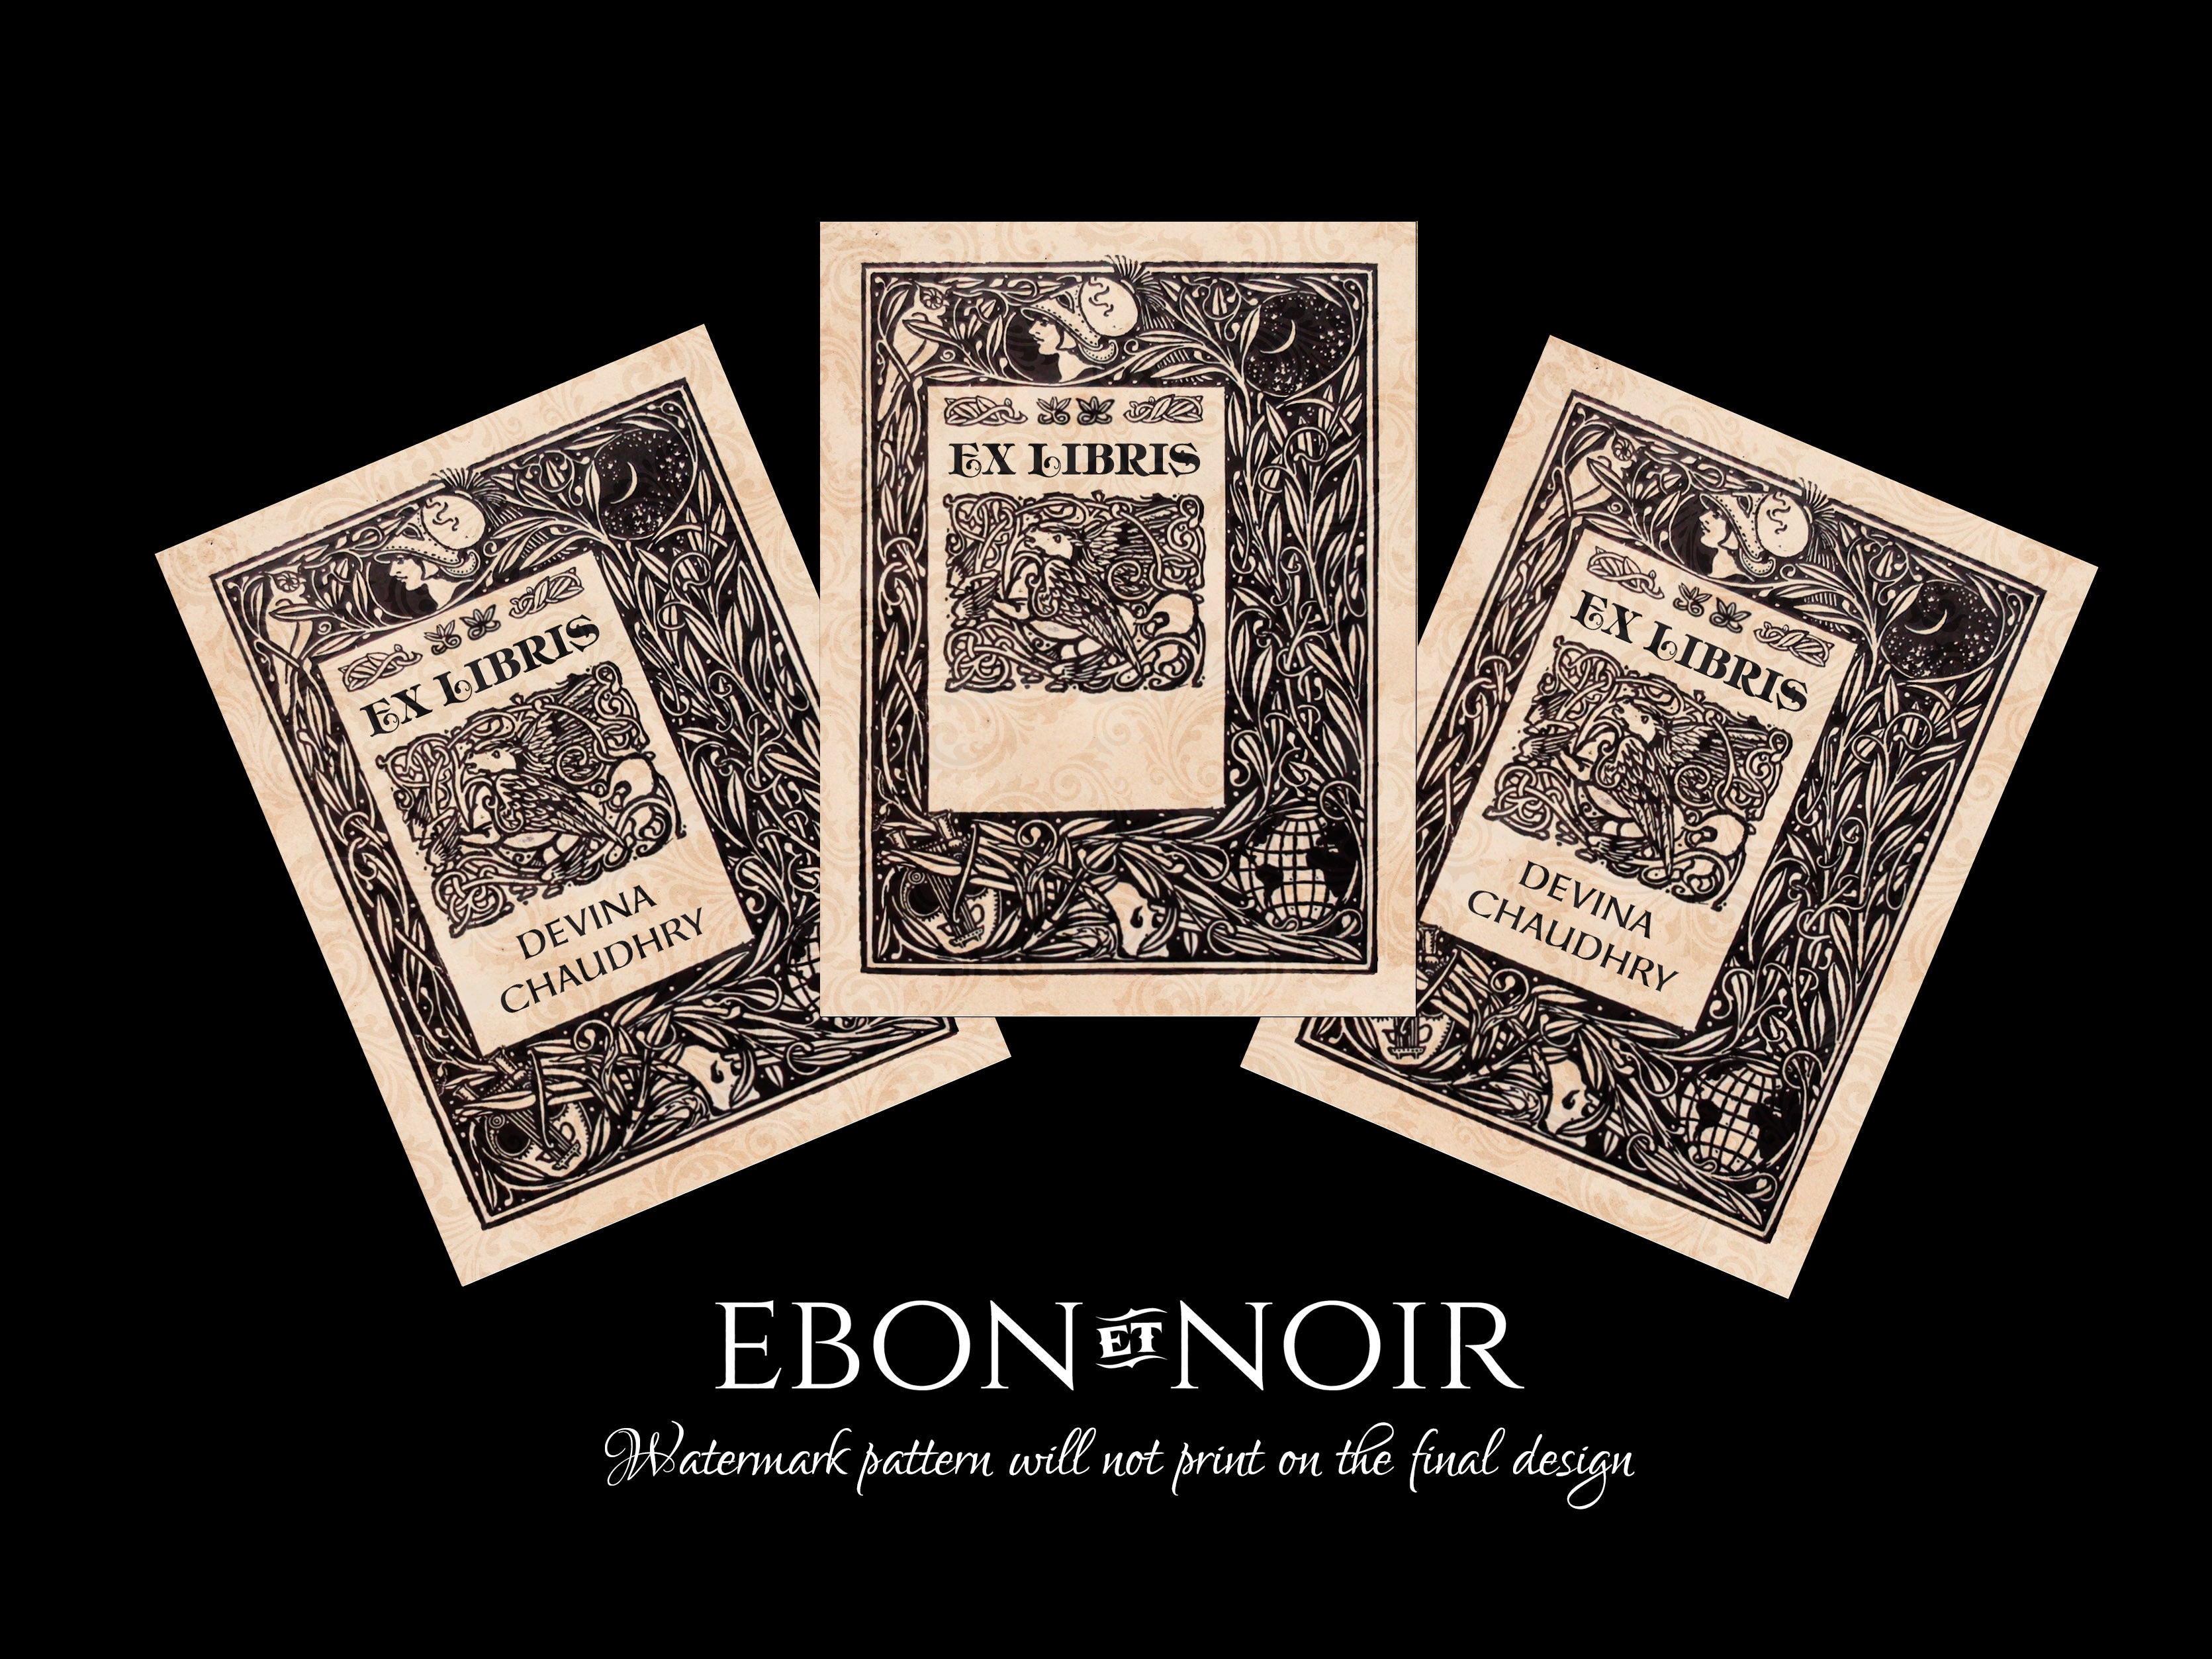 Harmonia Celestialis, Personalized Ex-Libris Bookplates, Crafted on Traditional Gummed Paper, 3in x 4in, Set of 30